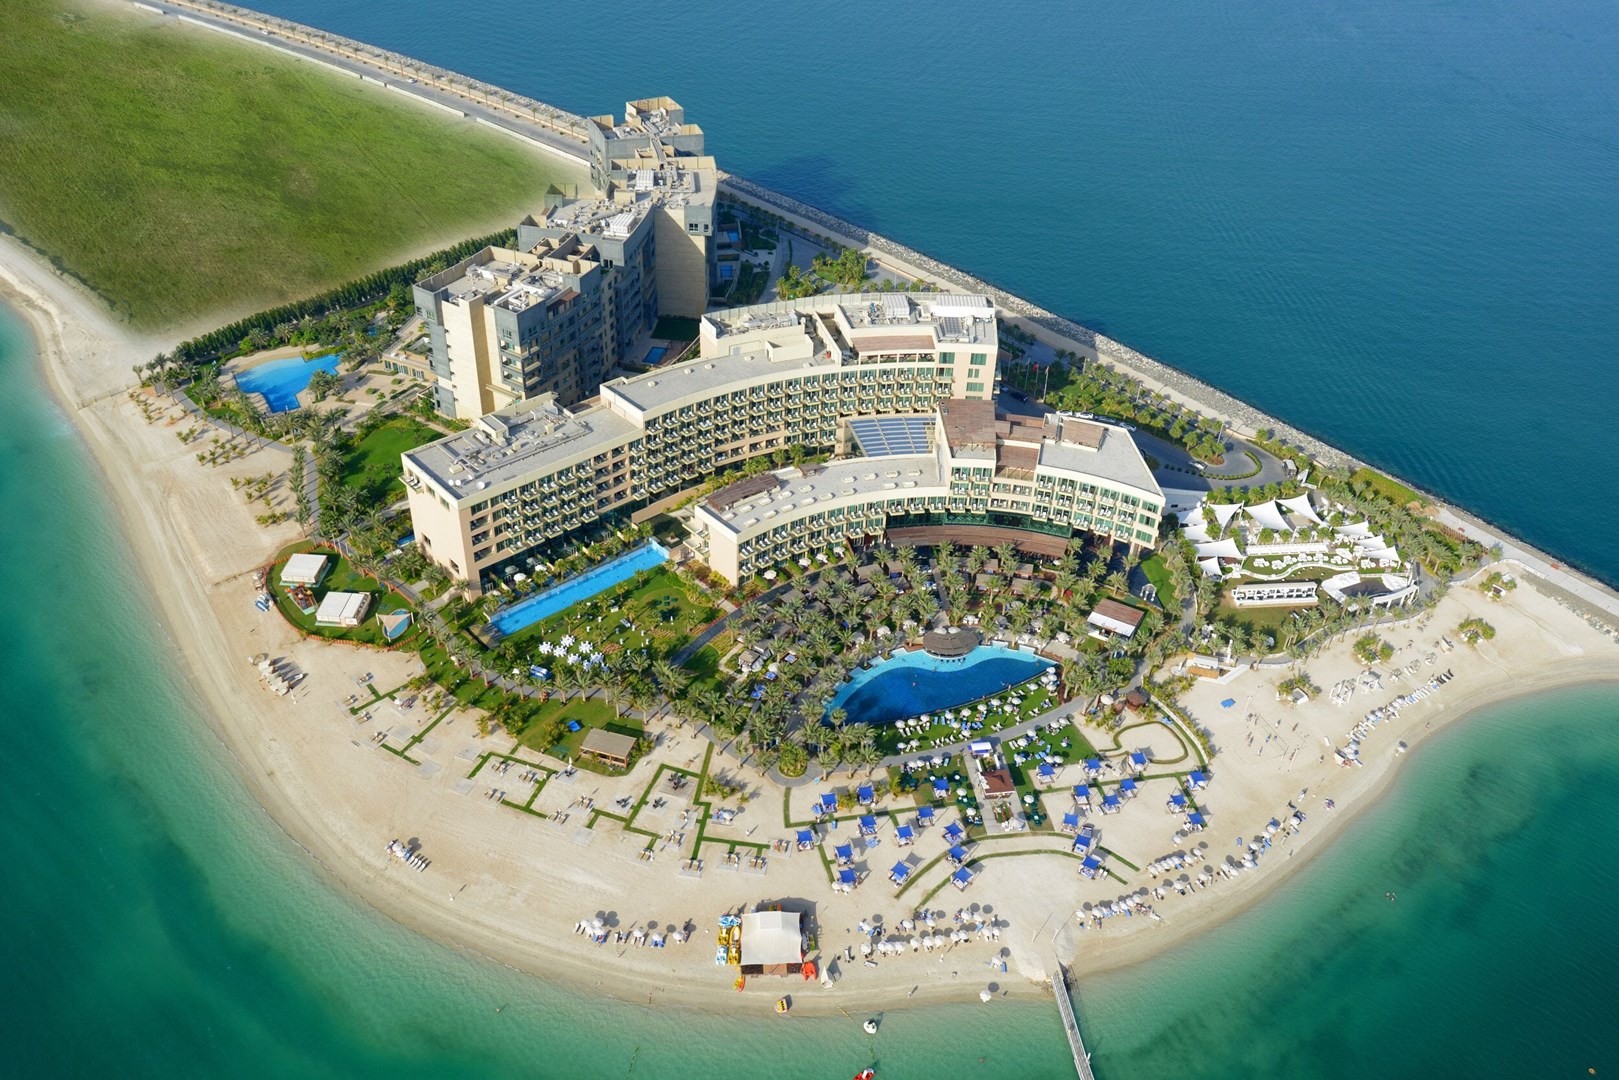 Rixos The Palm Dubai a best place to stay in Dubai for families